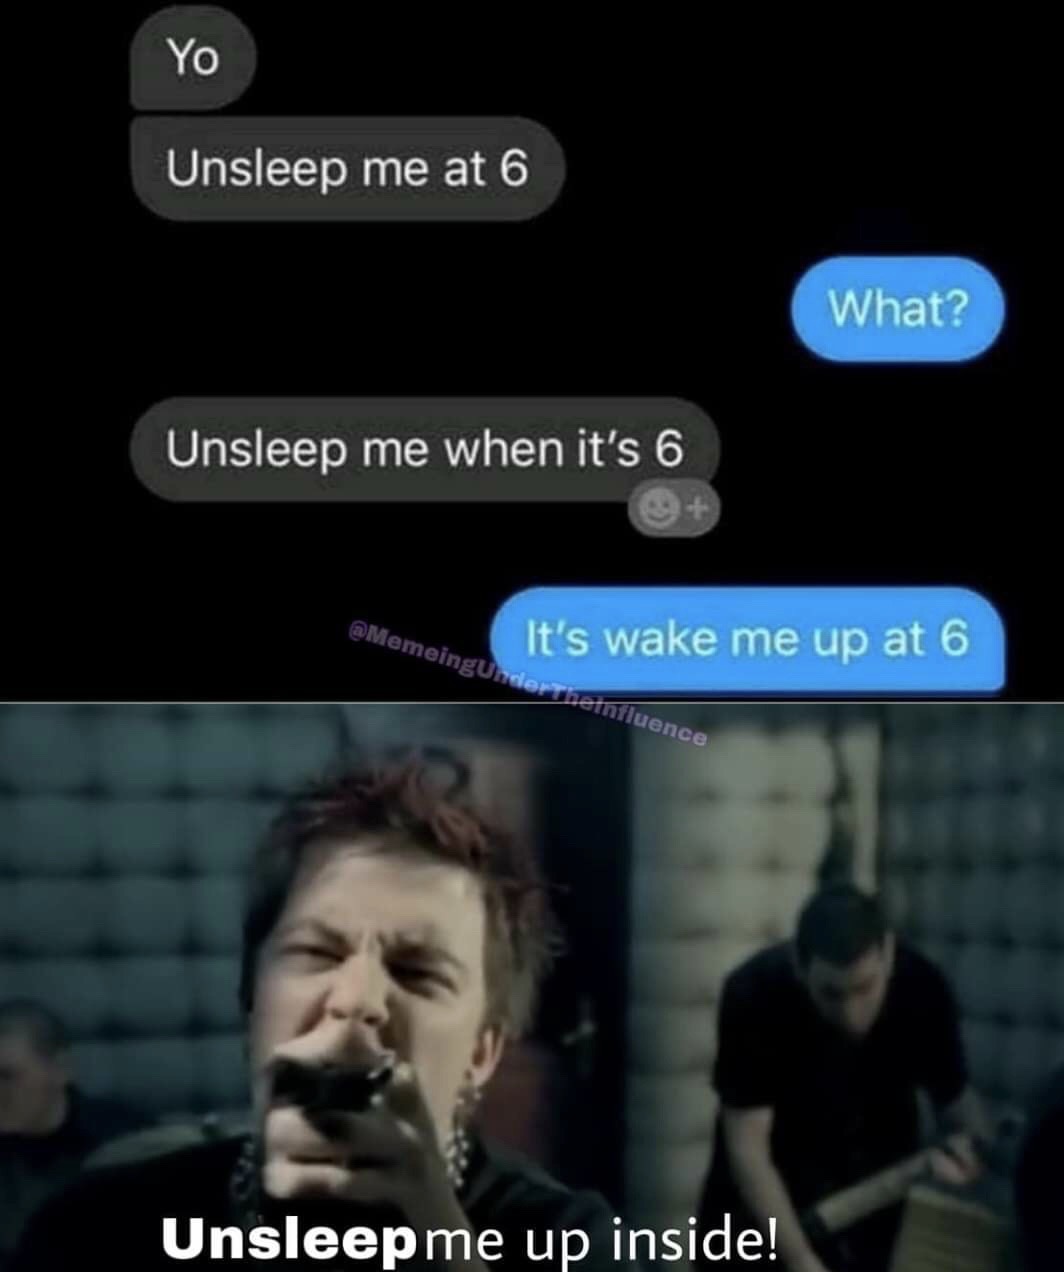 video - Yo Unsleep me at 6 What? Unsleep me when it's 6 It's wake me up at 6 Unsleep me up inside!